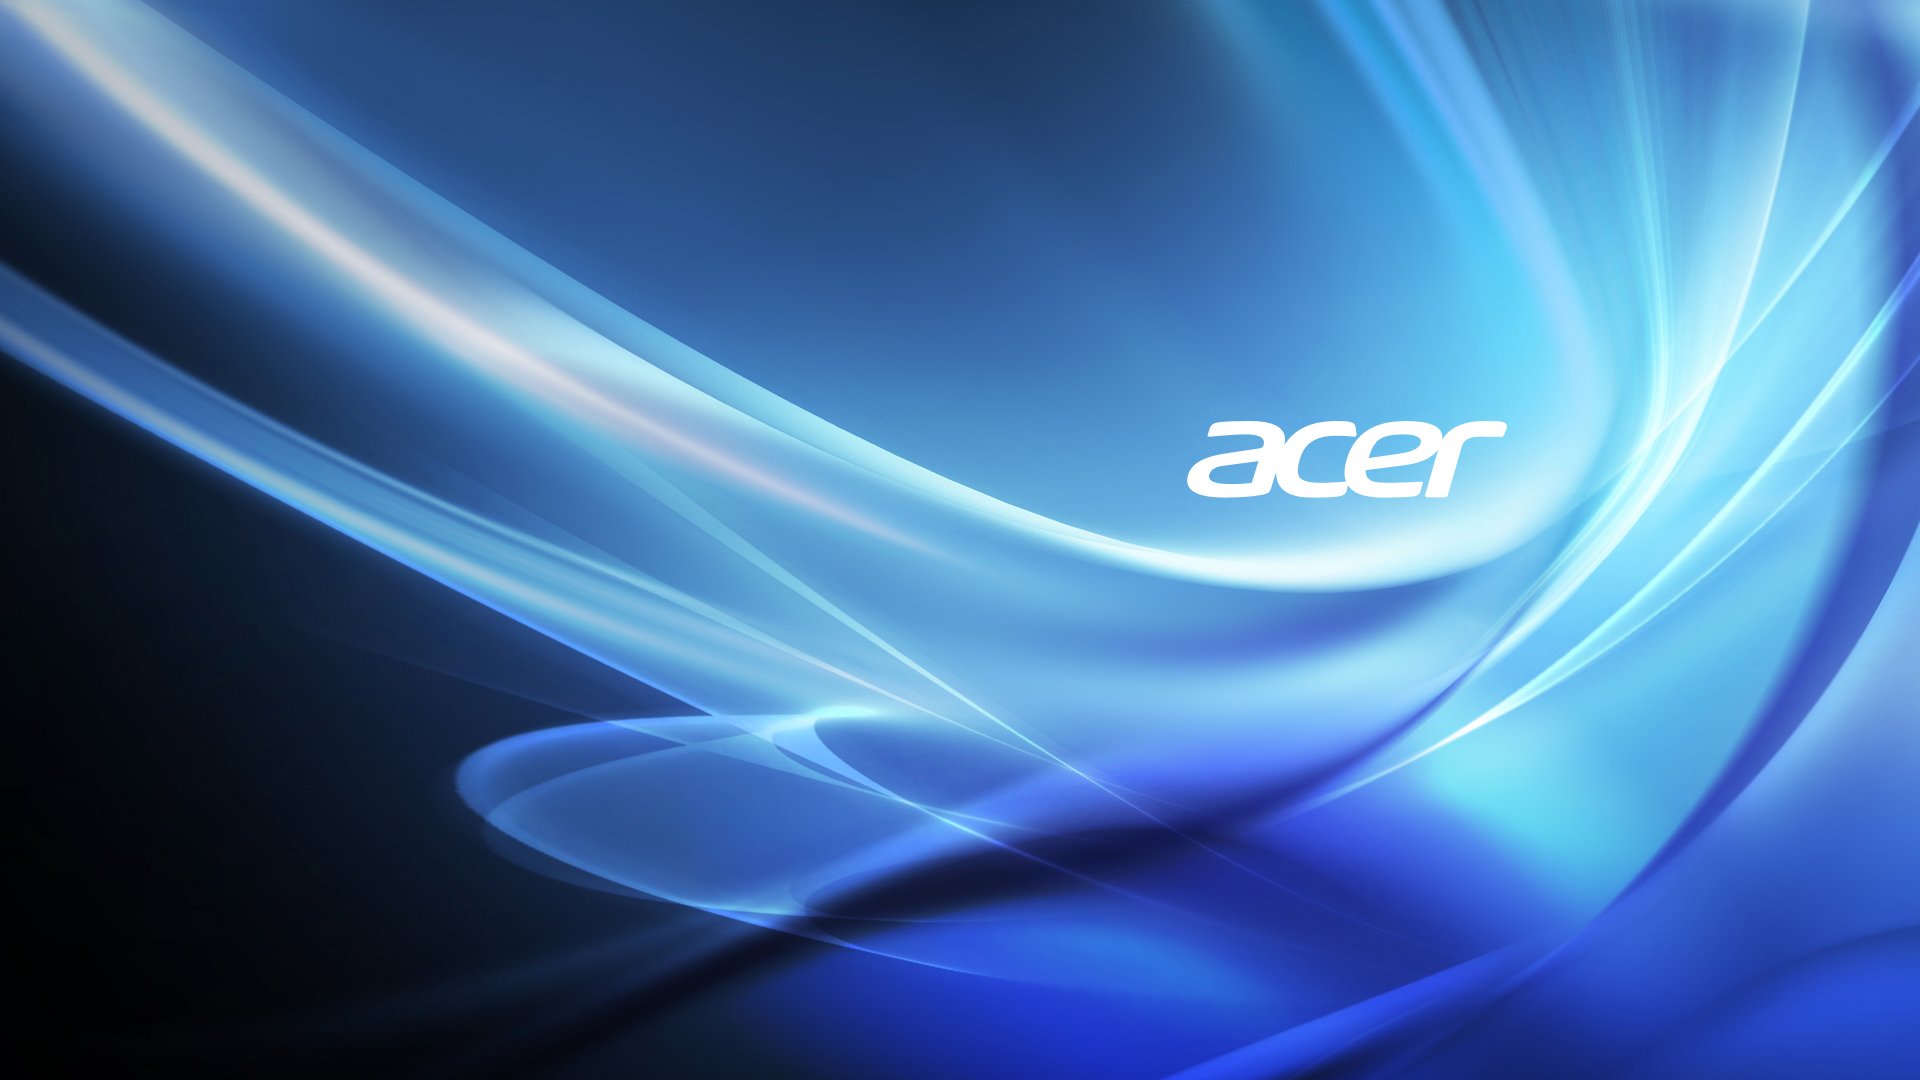 Acer 1920x1080